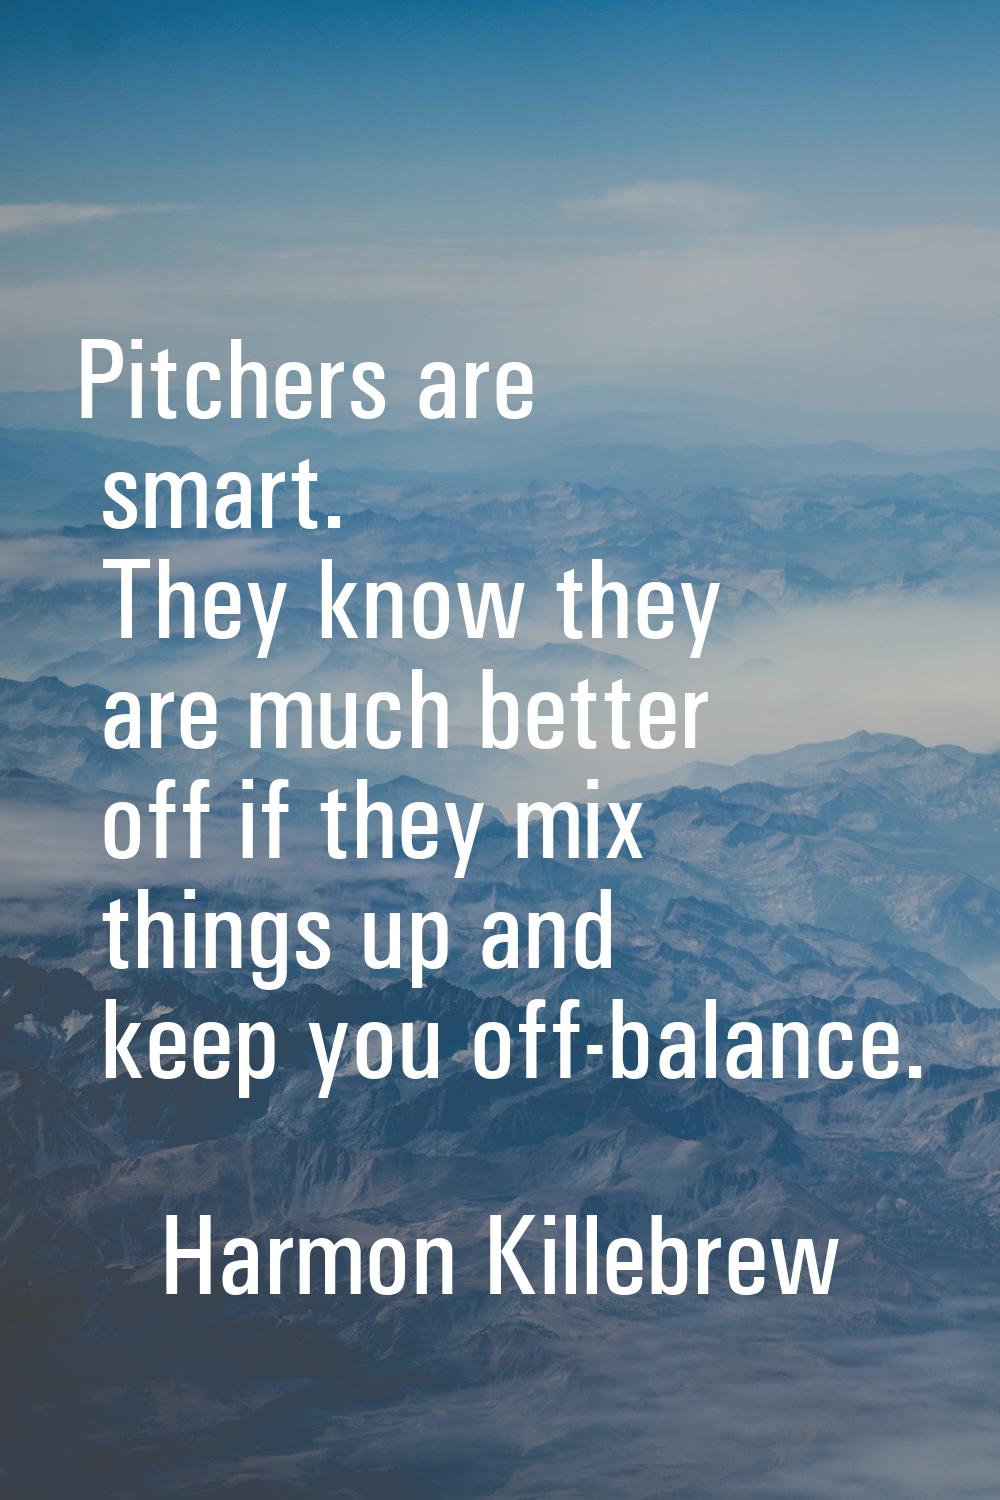 Pitchers are smart. They know they are much better off if they mix things up and keep you off-balan